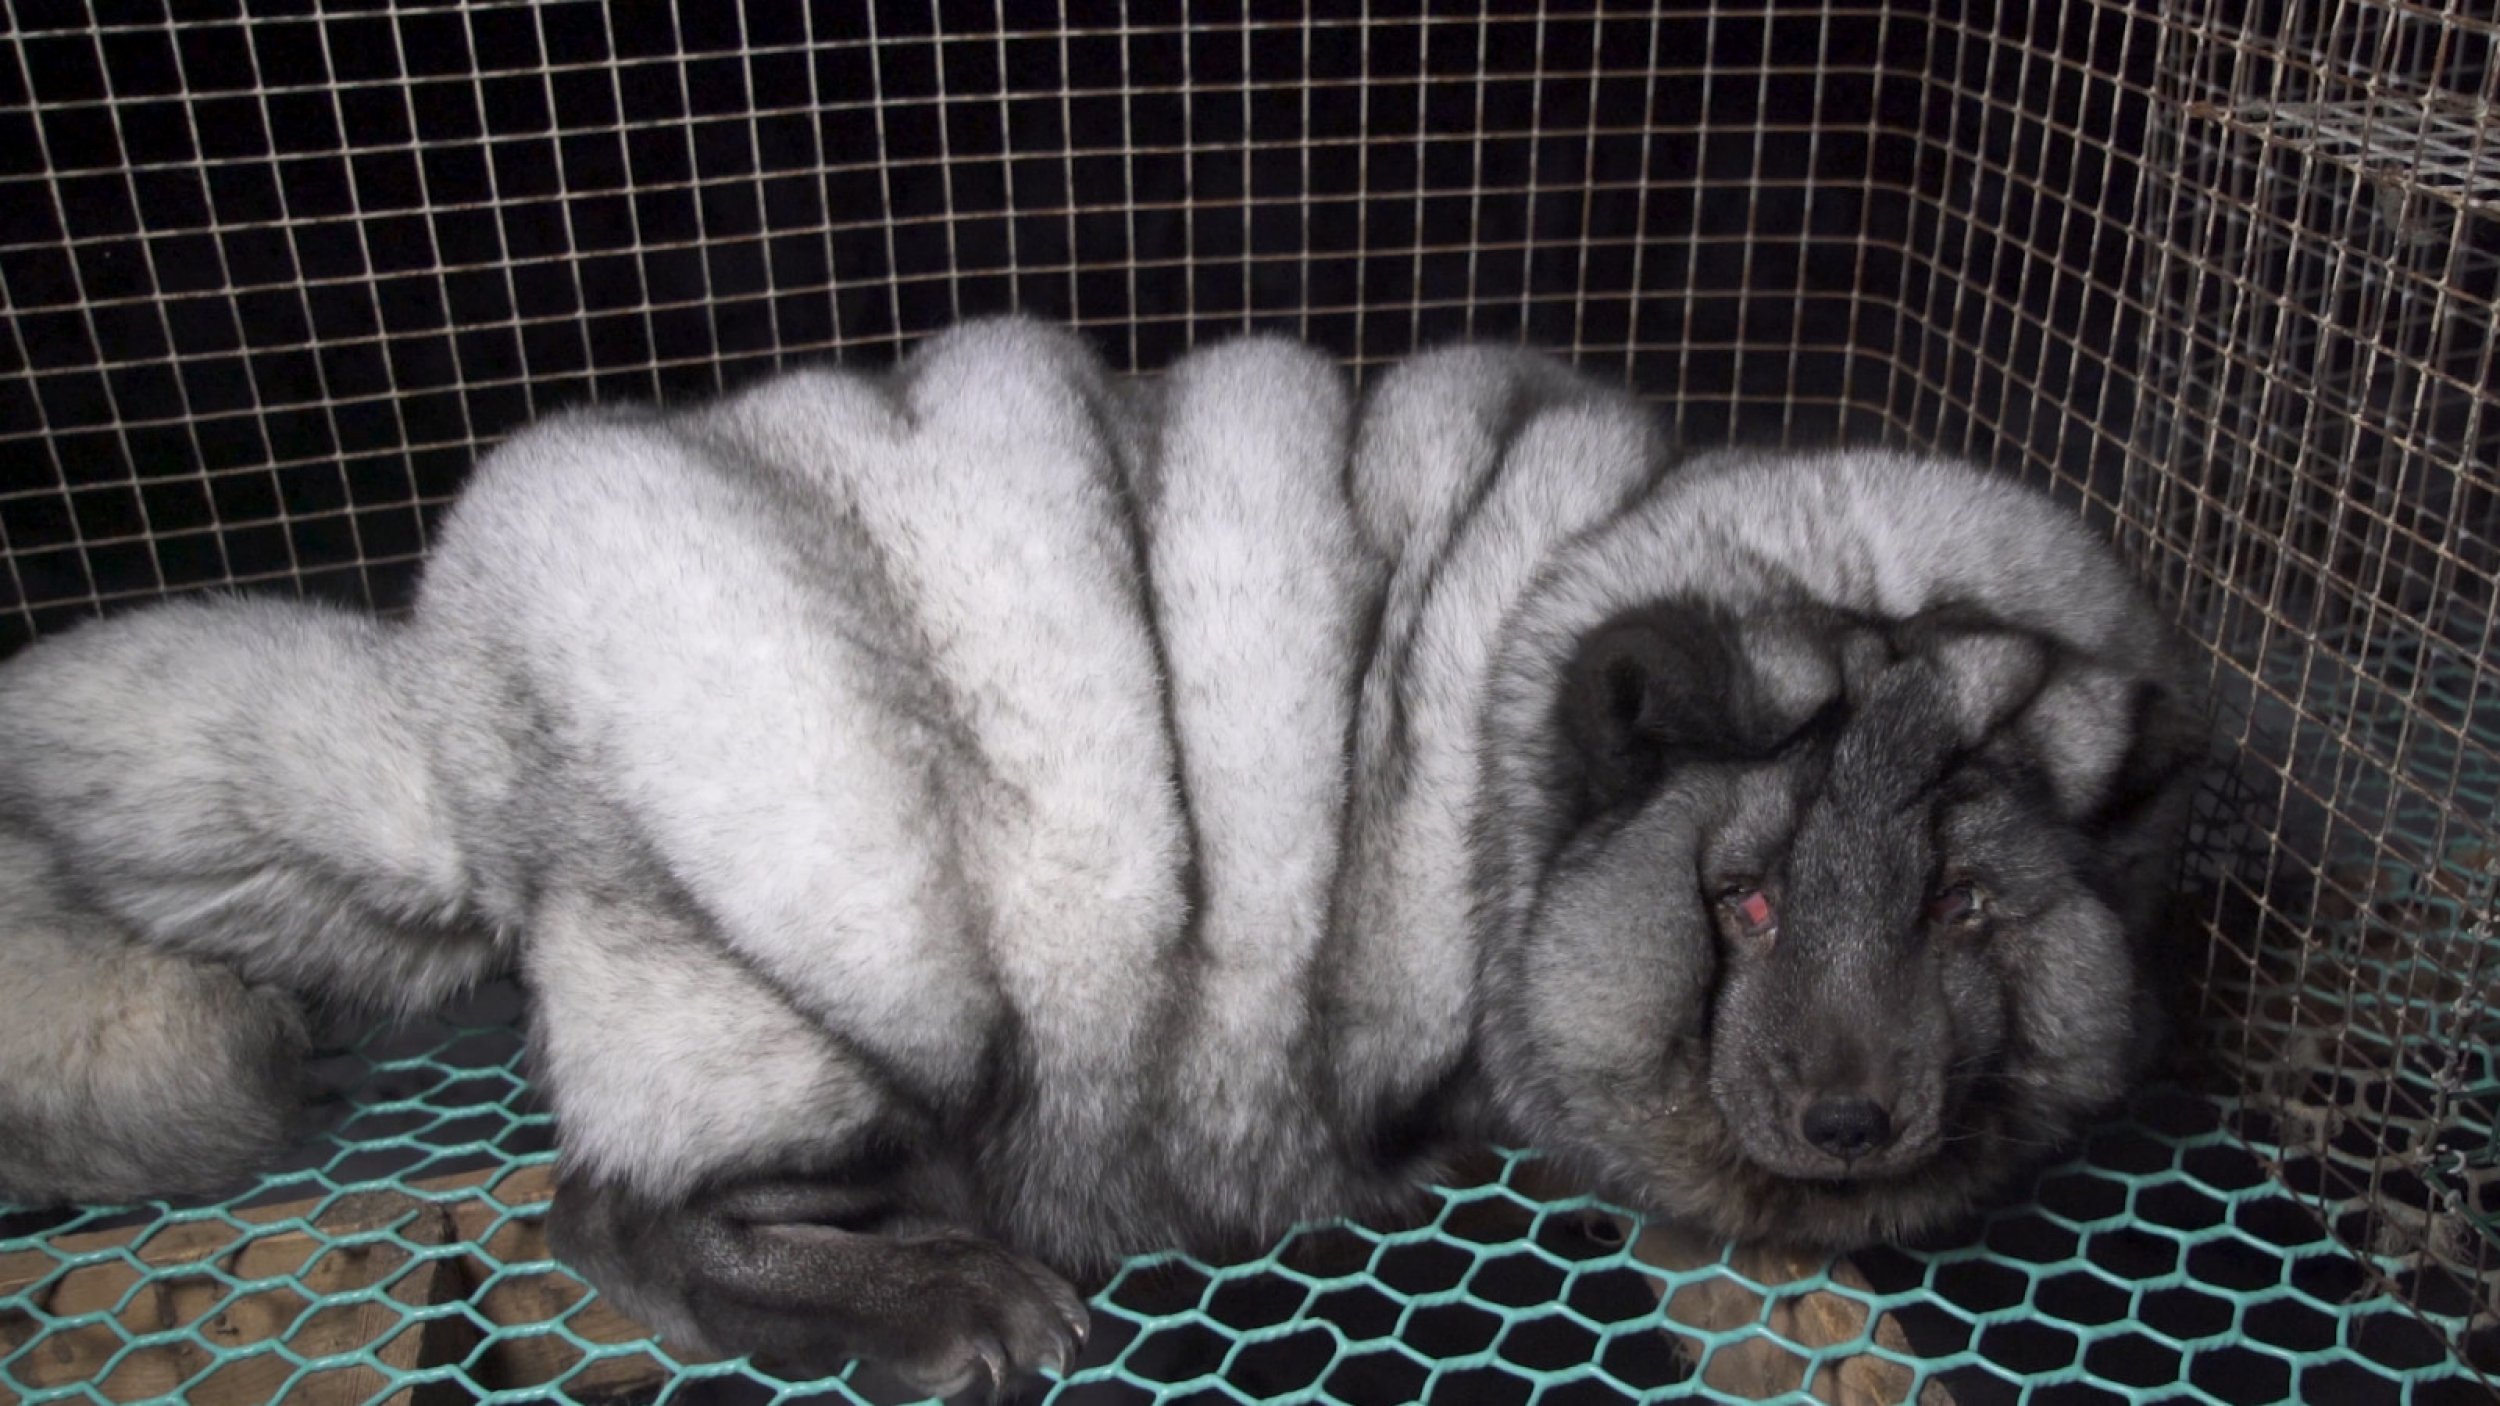 Video Of Obese Monster Foxes Shows Shocking Conditions On Fur Farms